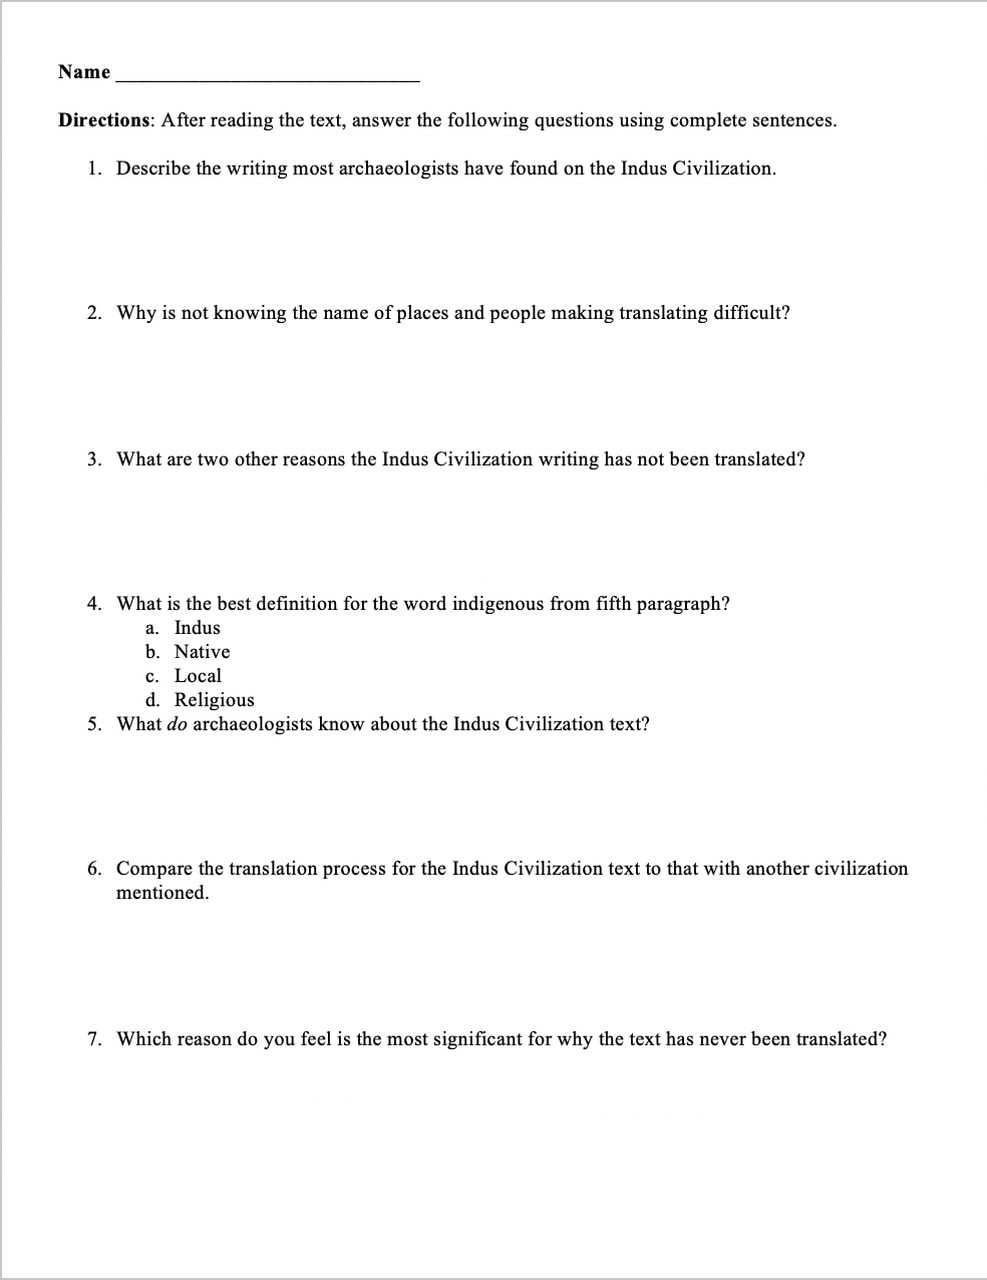 River Valley Civilizations Worksheet Answers Indus River Valley Civilization why their Writing is Not Translated